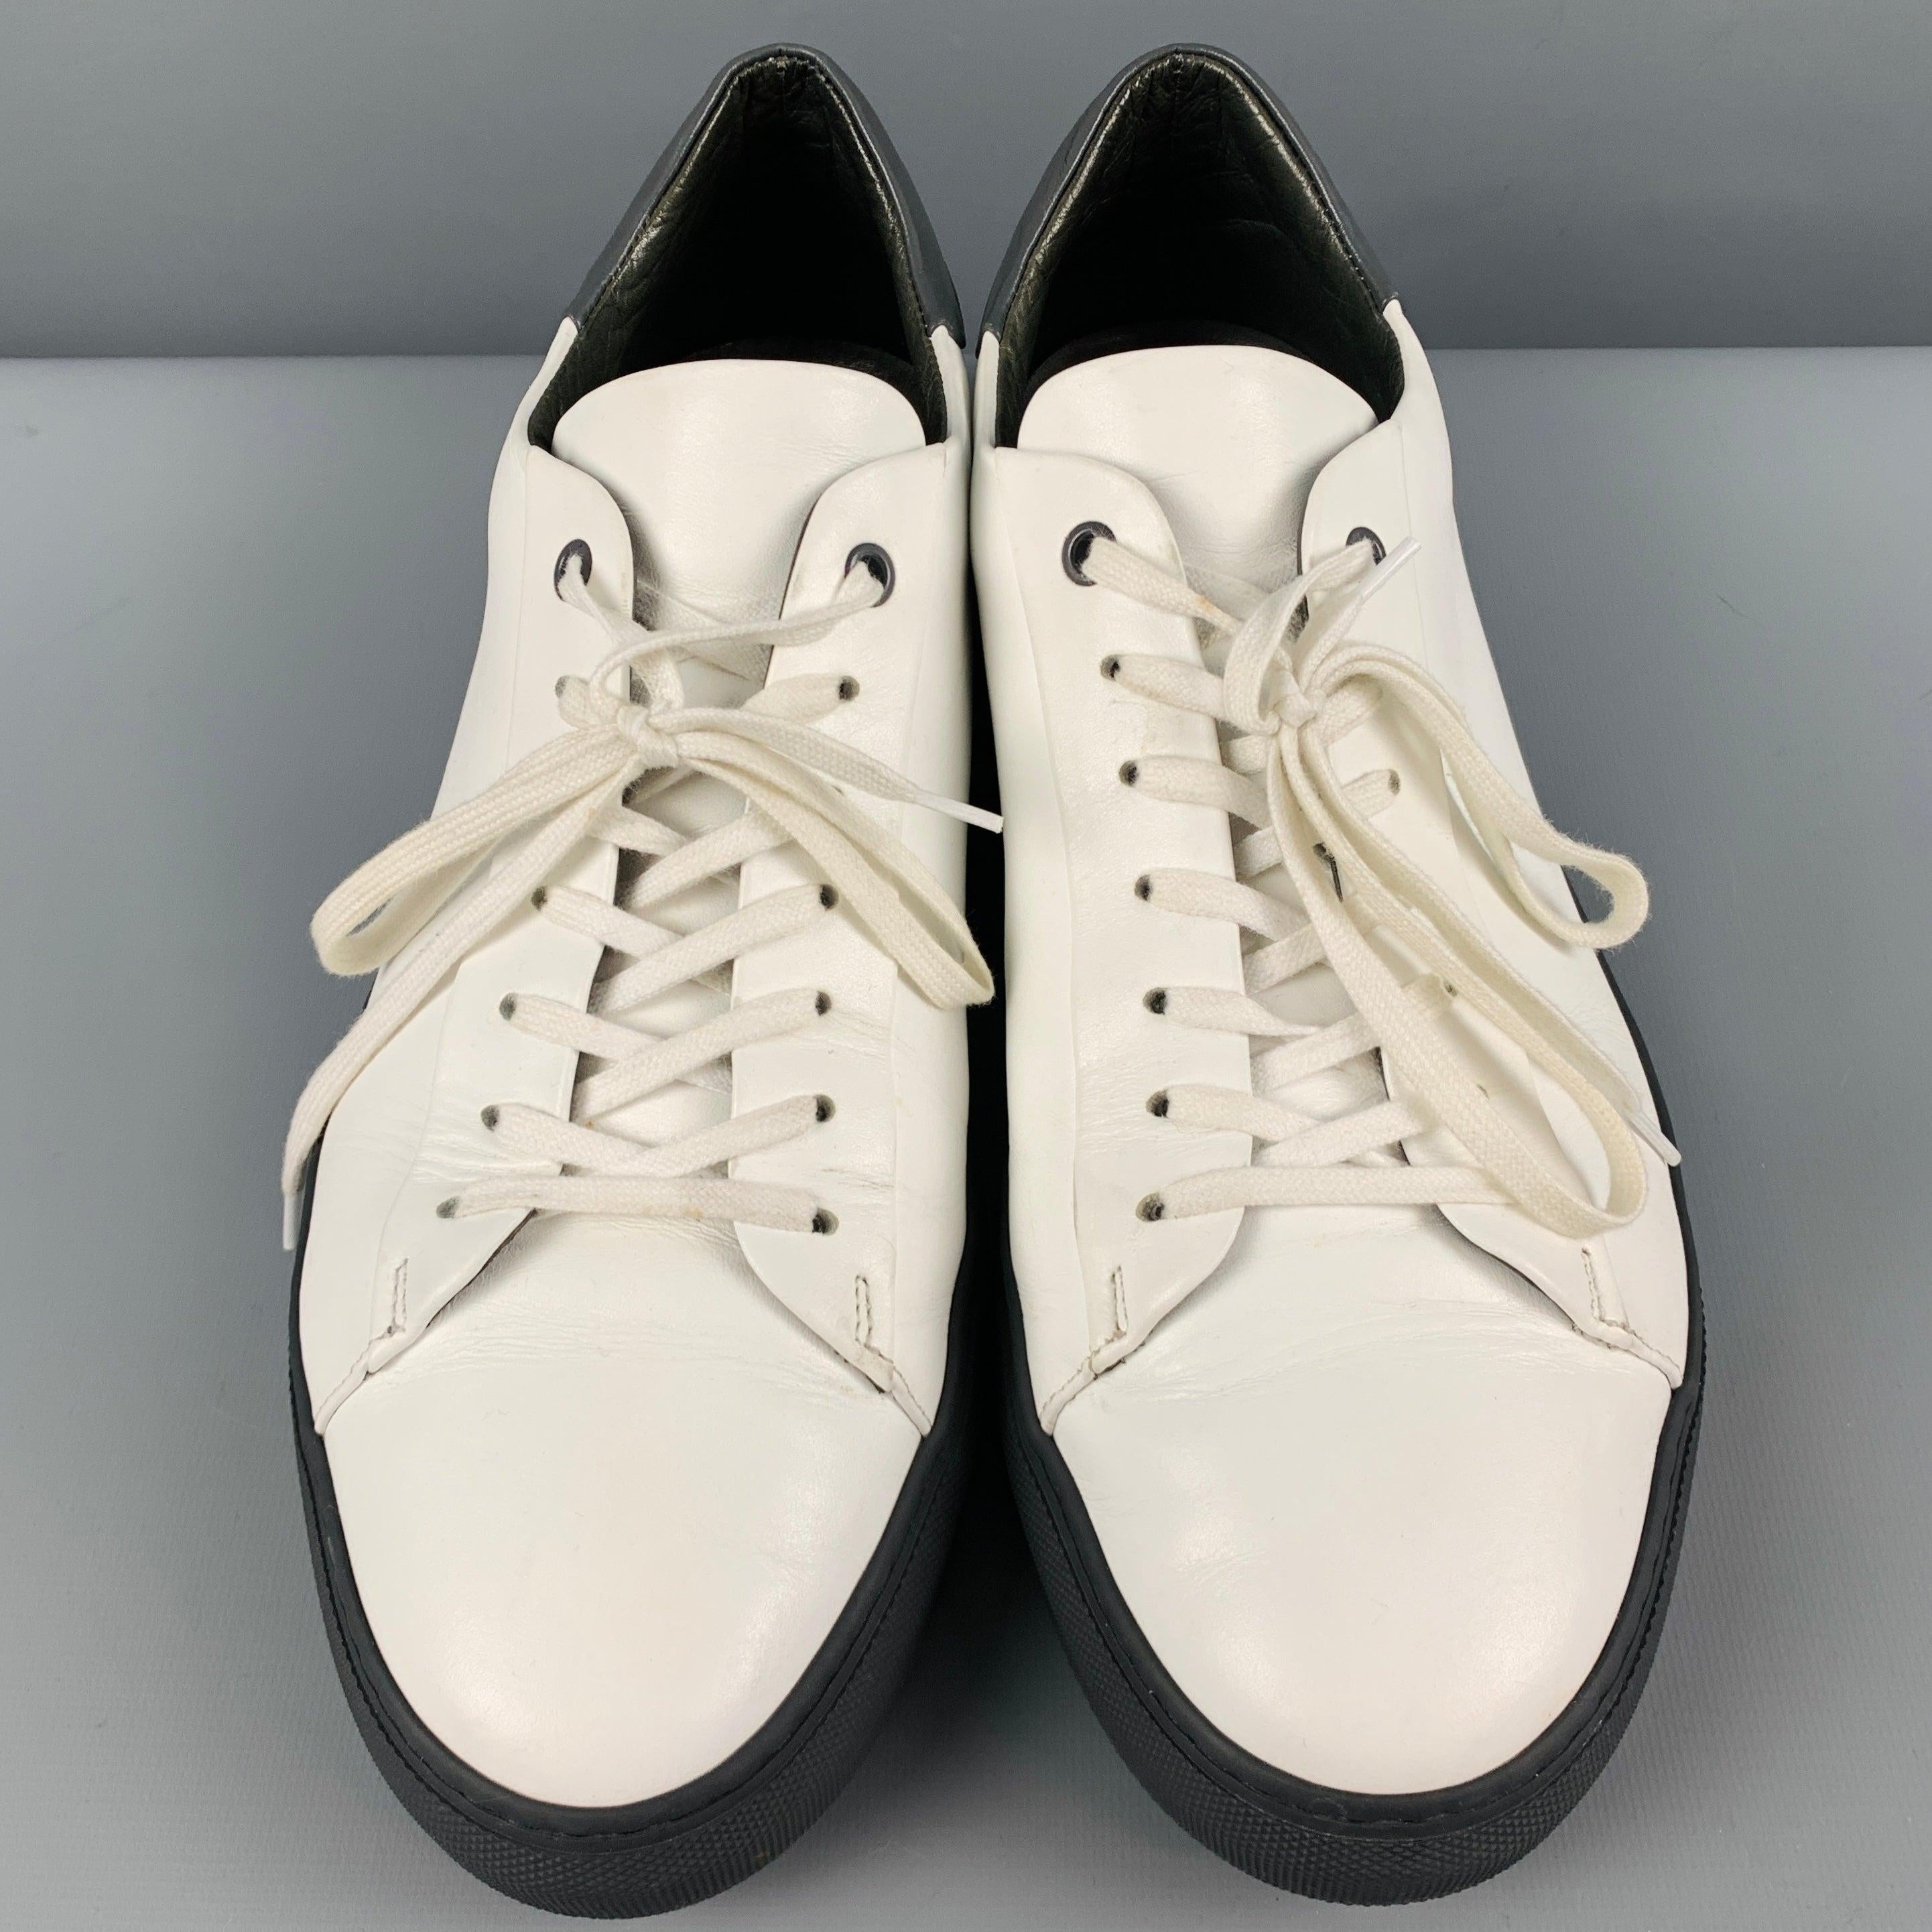 Men's SAKS FIFTH AVENUE Size 12 White Black Leather Low Top Lace-Up Shoes For Sale